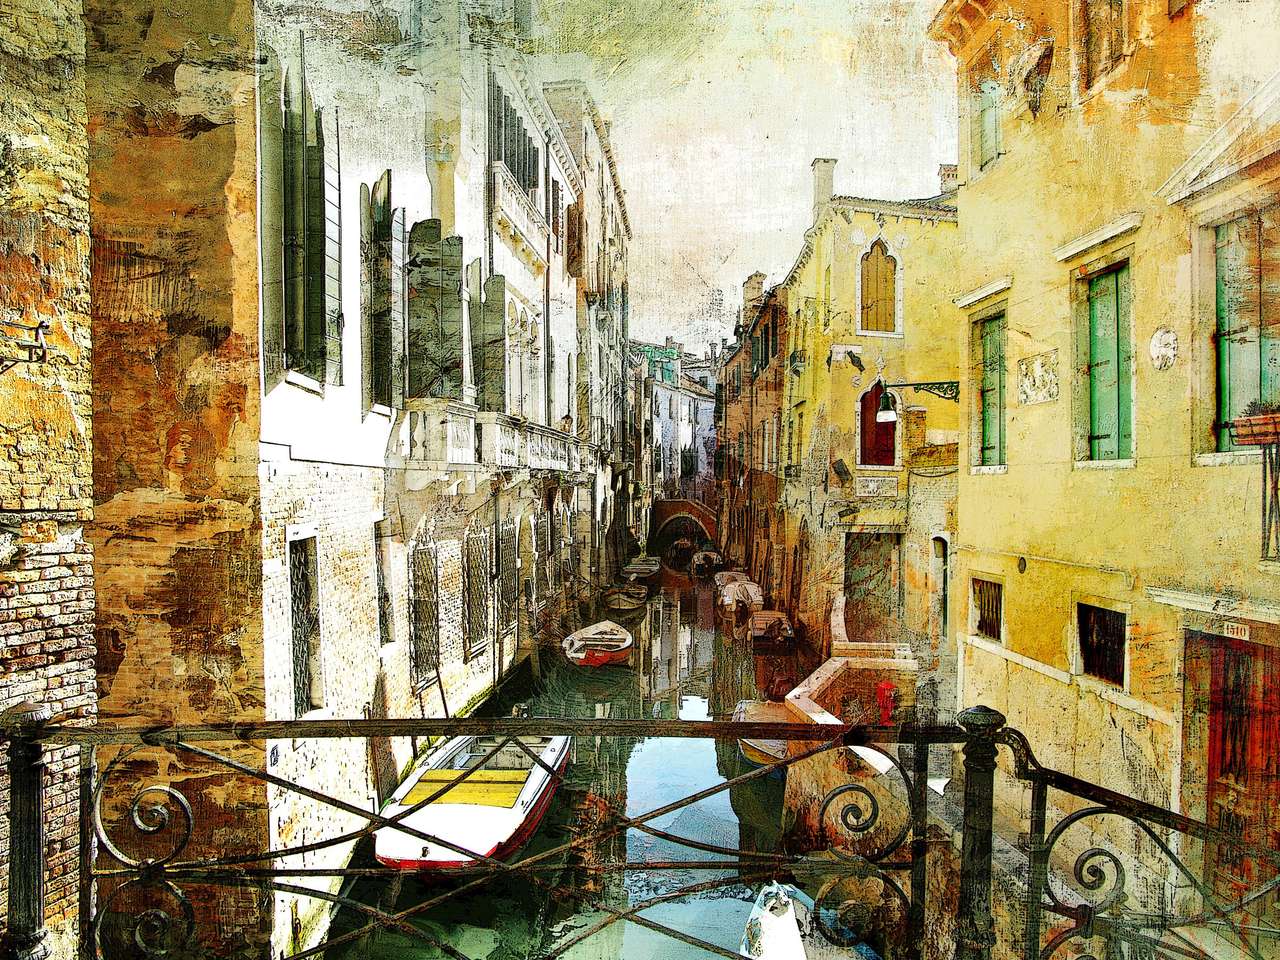 Venetian pictures - artwotk in painting style puzzle